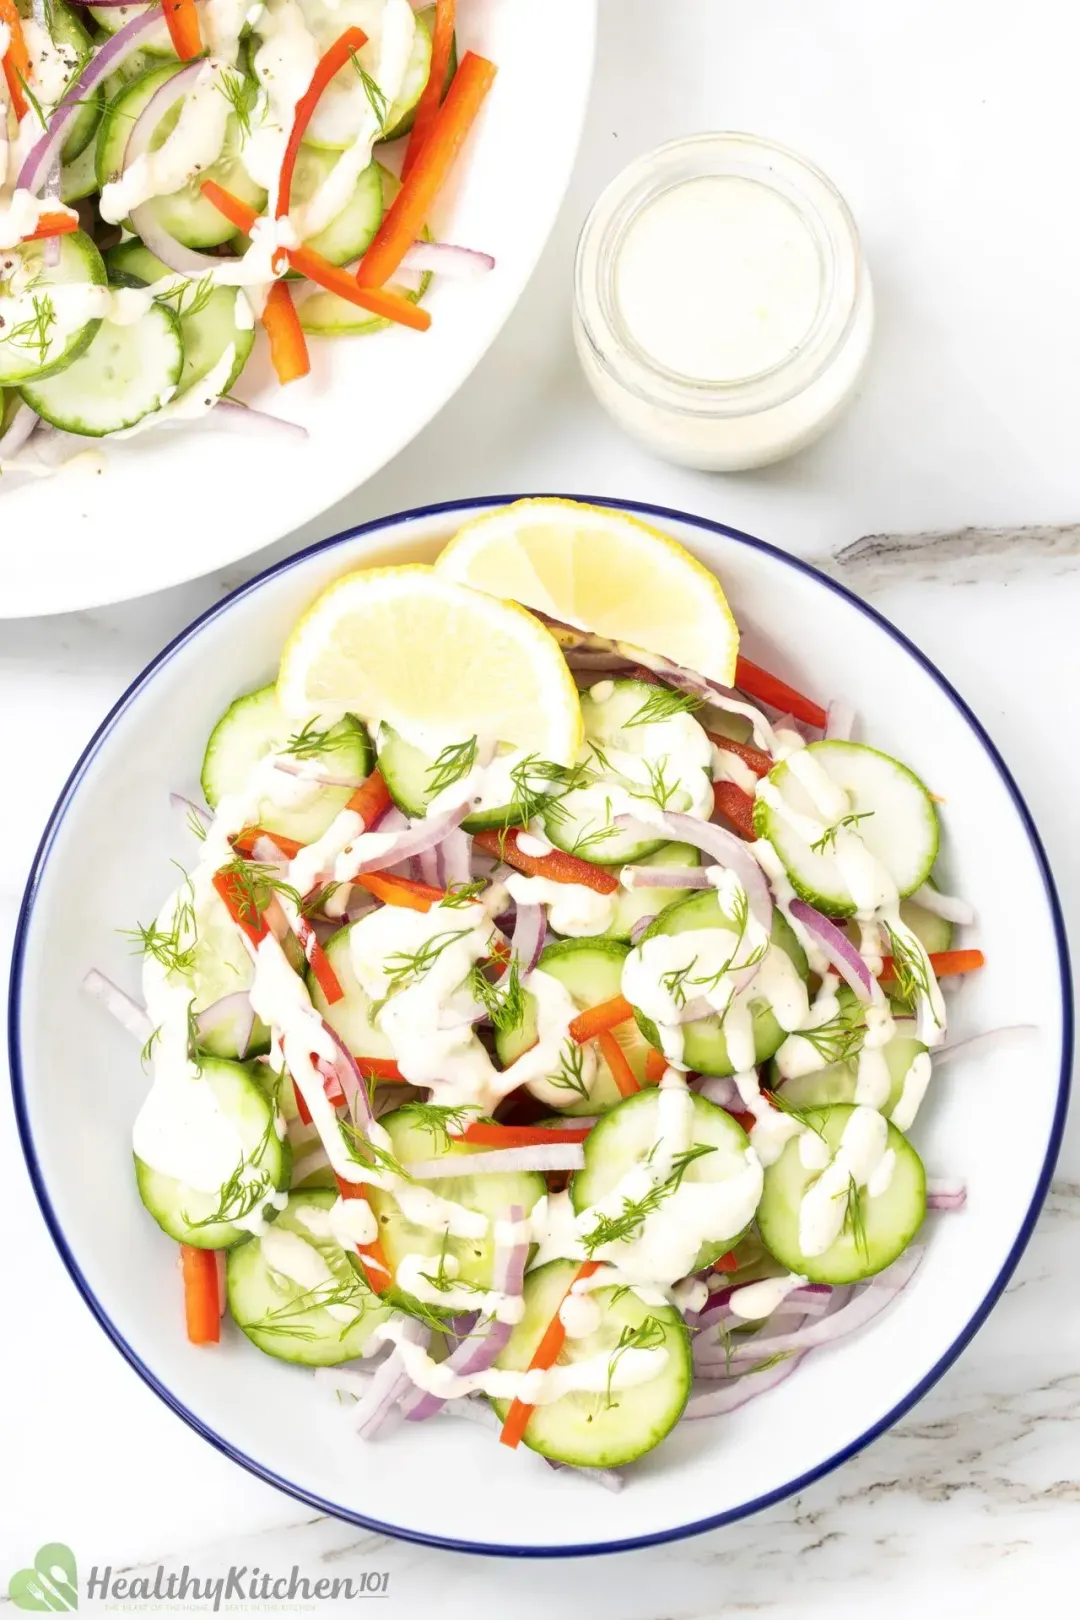 Healthy cucumber salad on two plates with sliced cucumbers, sliced red peppers, red onions, and a light dressing.